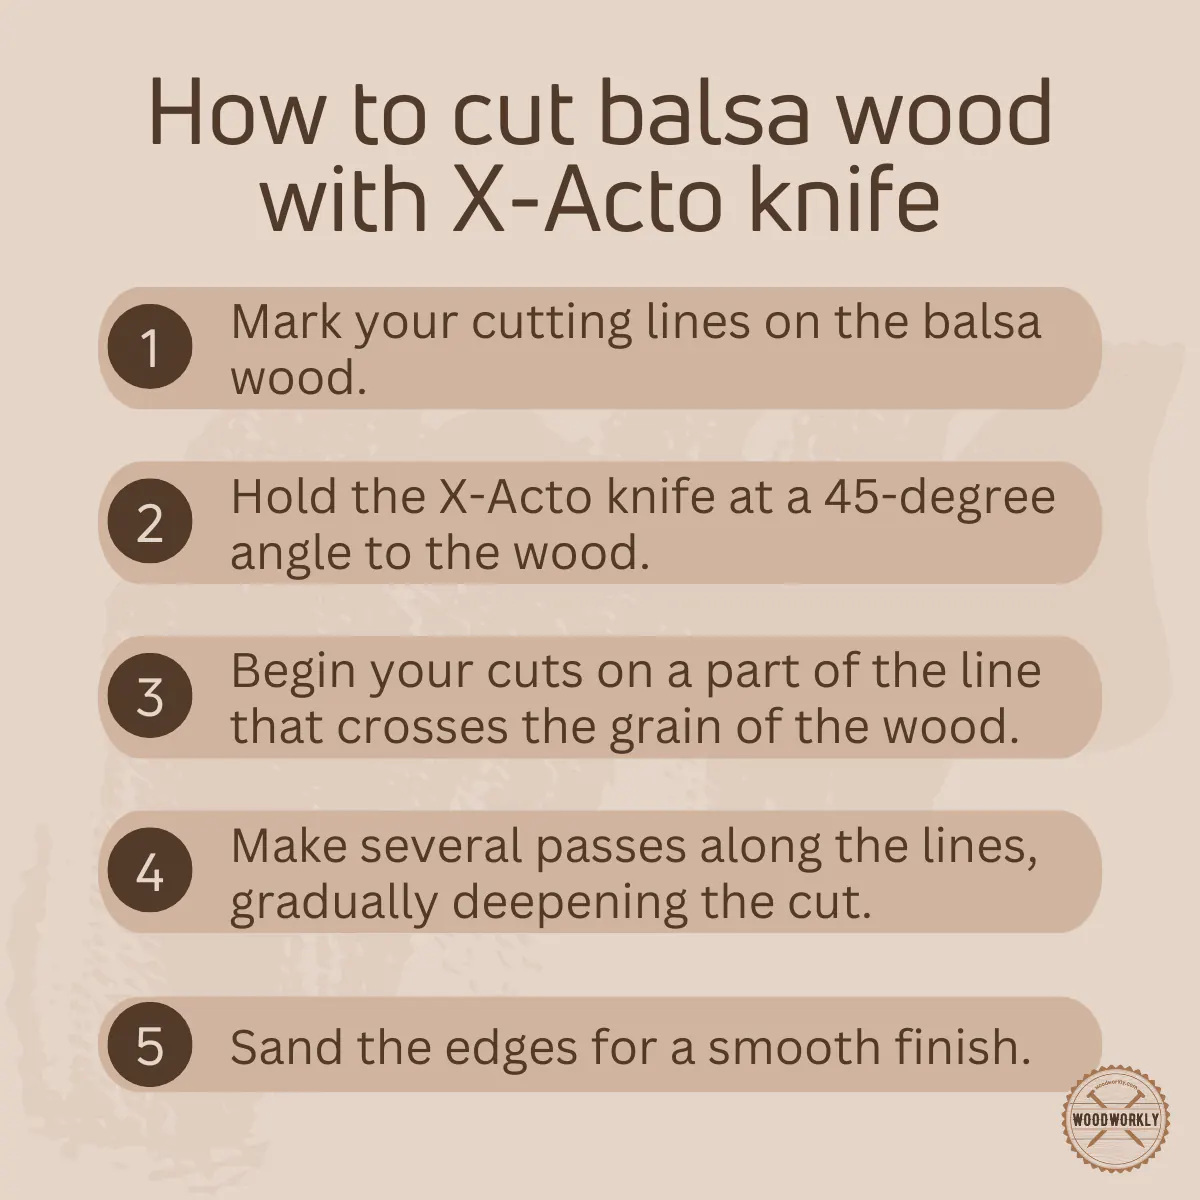 How to cut balsa wood with X-Acto knife